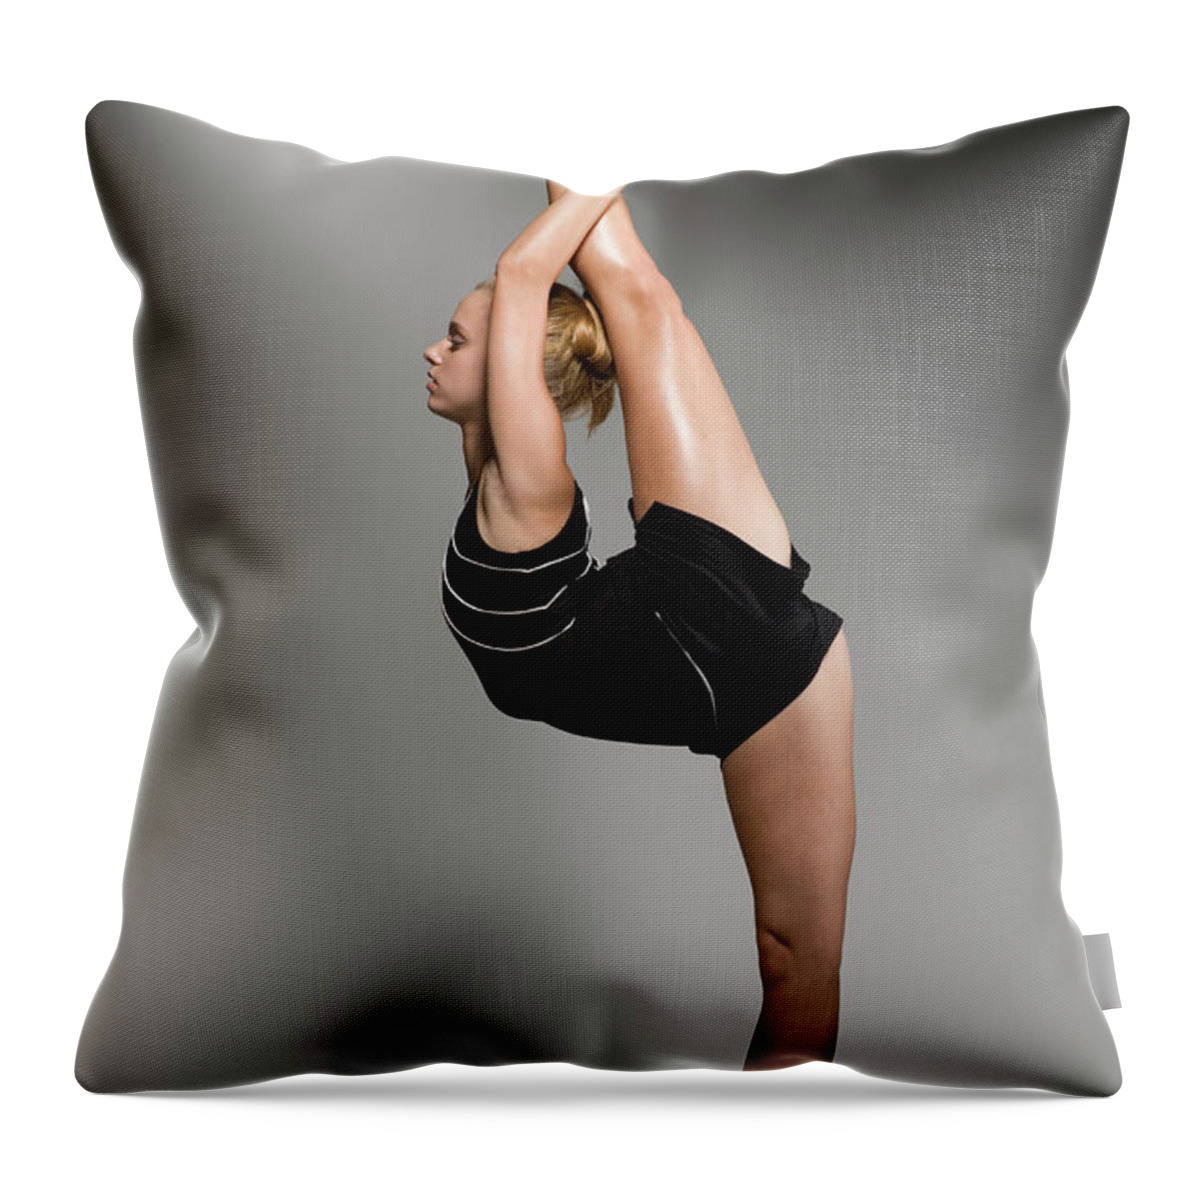 Human Arm Throw Pillow featuring the photograph Female Gymnast Stretching, Studio Shot by Siri Stafford